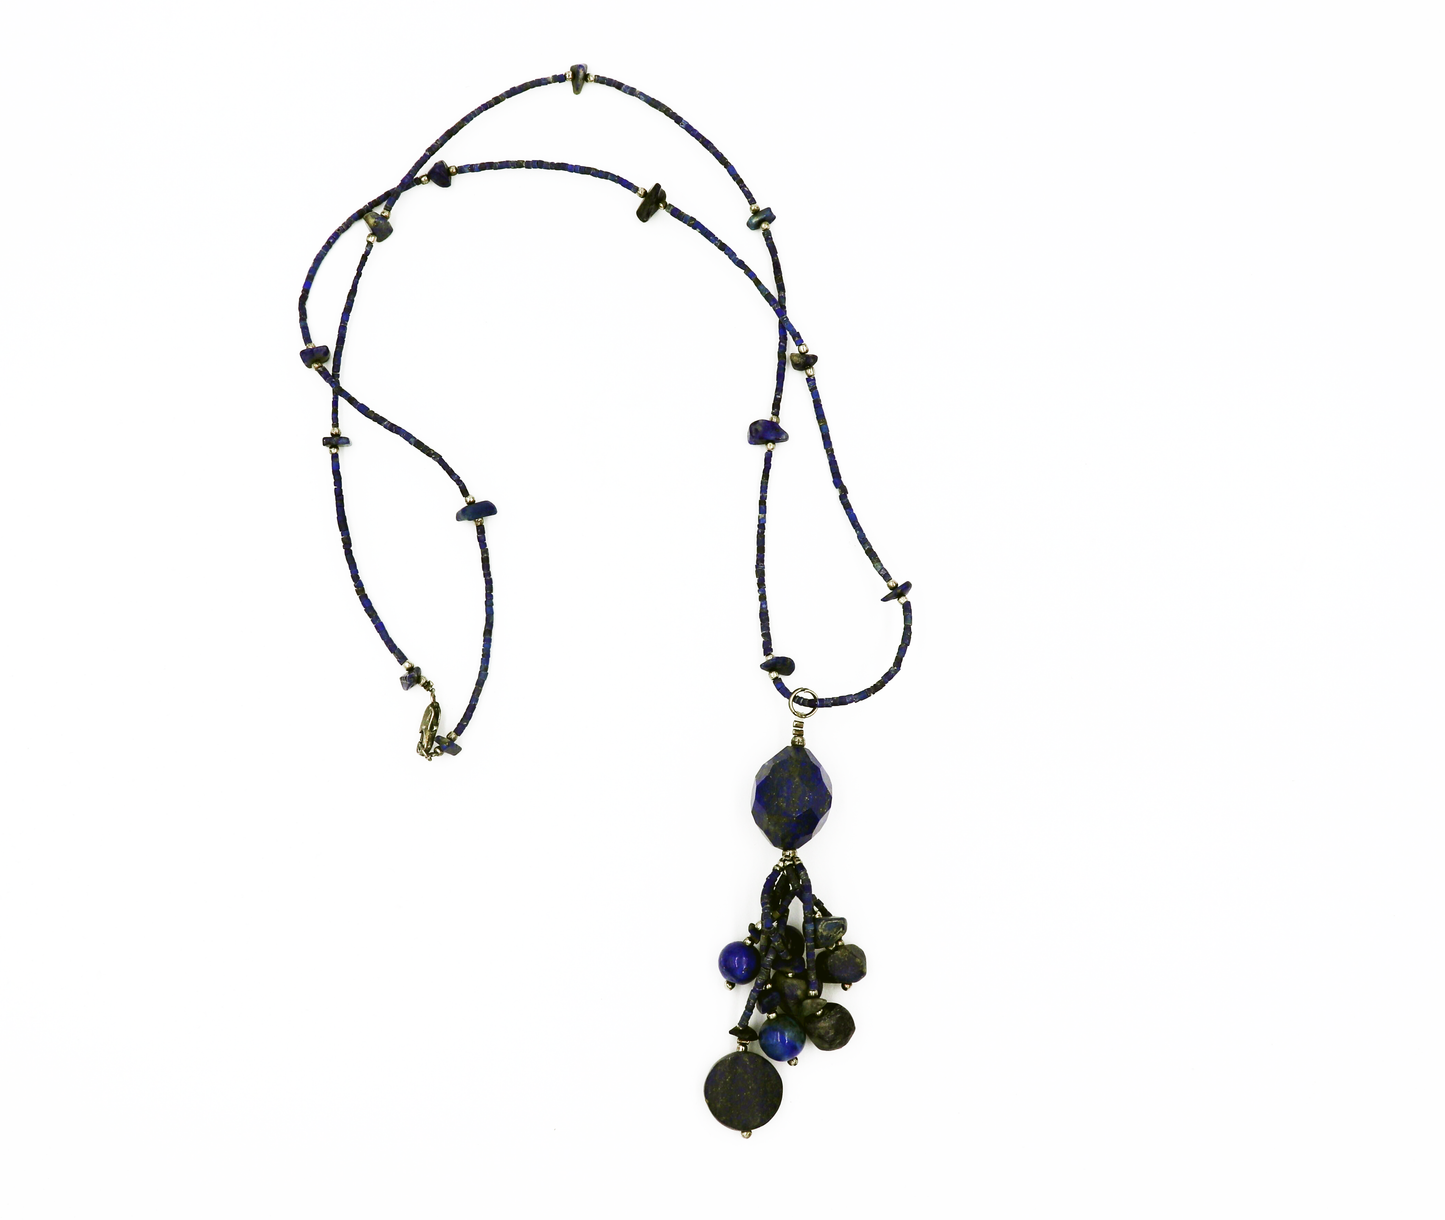 Hand Crafted Lapis Lazuli Necklace